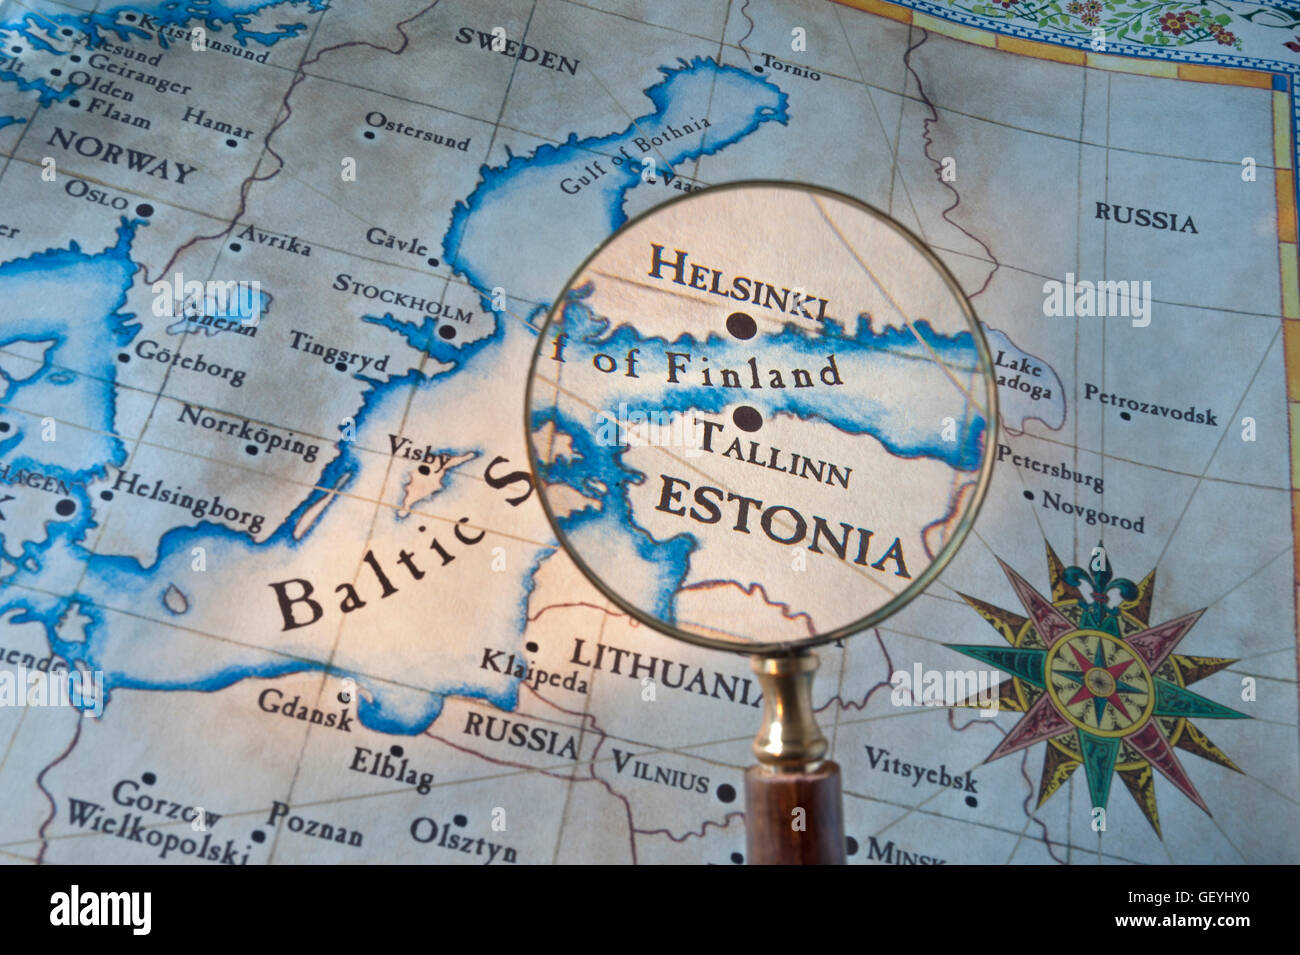 HELSINKI Old style map with magnifying glass over Gulf of Finland featuring Helsinki & Tallinn with Baltic Sea Sweden & Eastern Europe Stock Photo